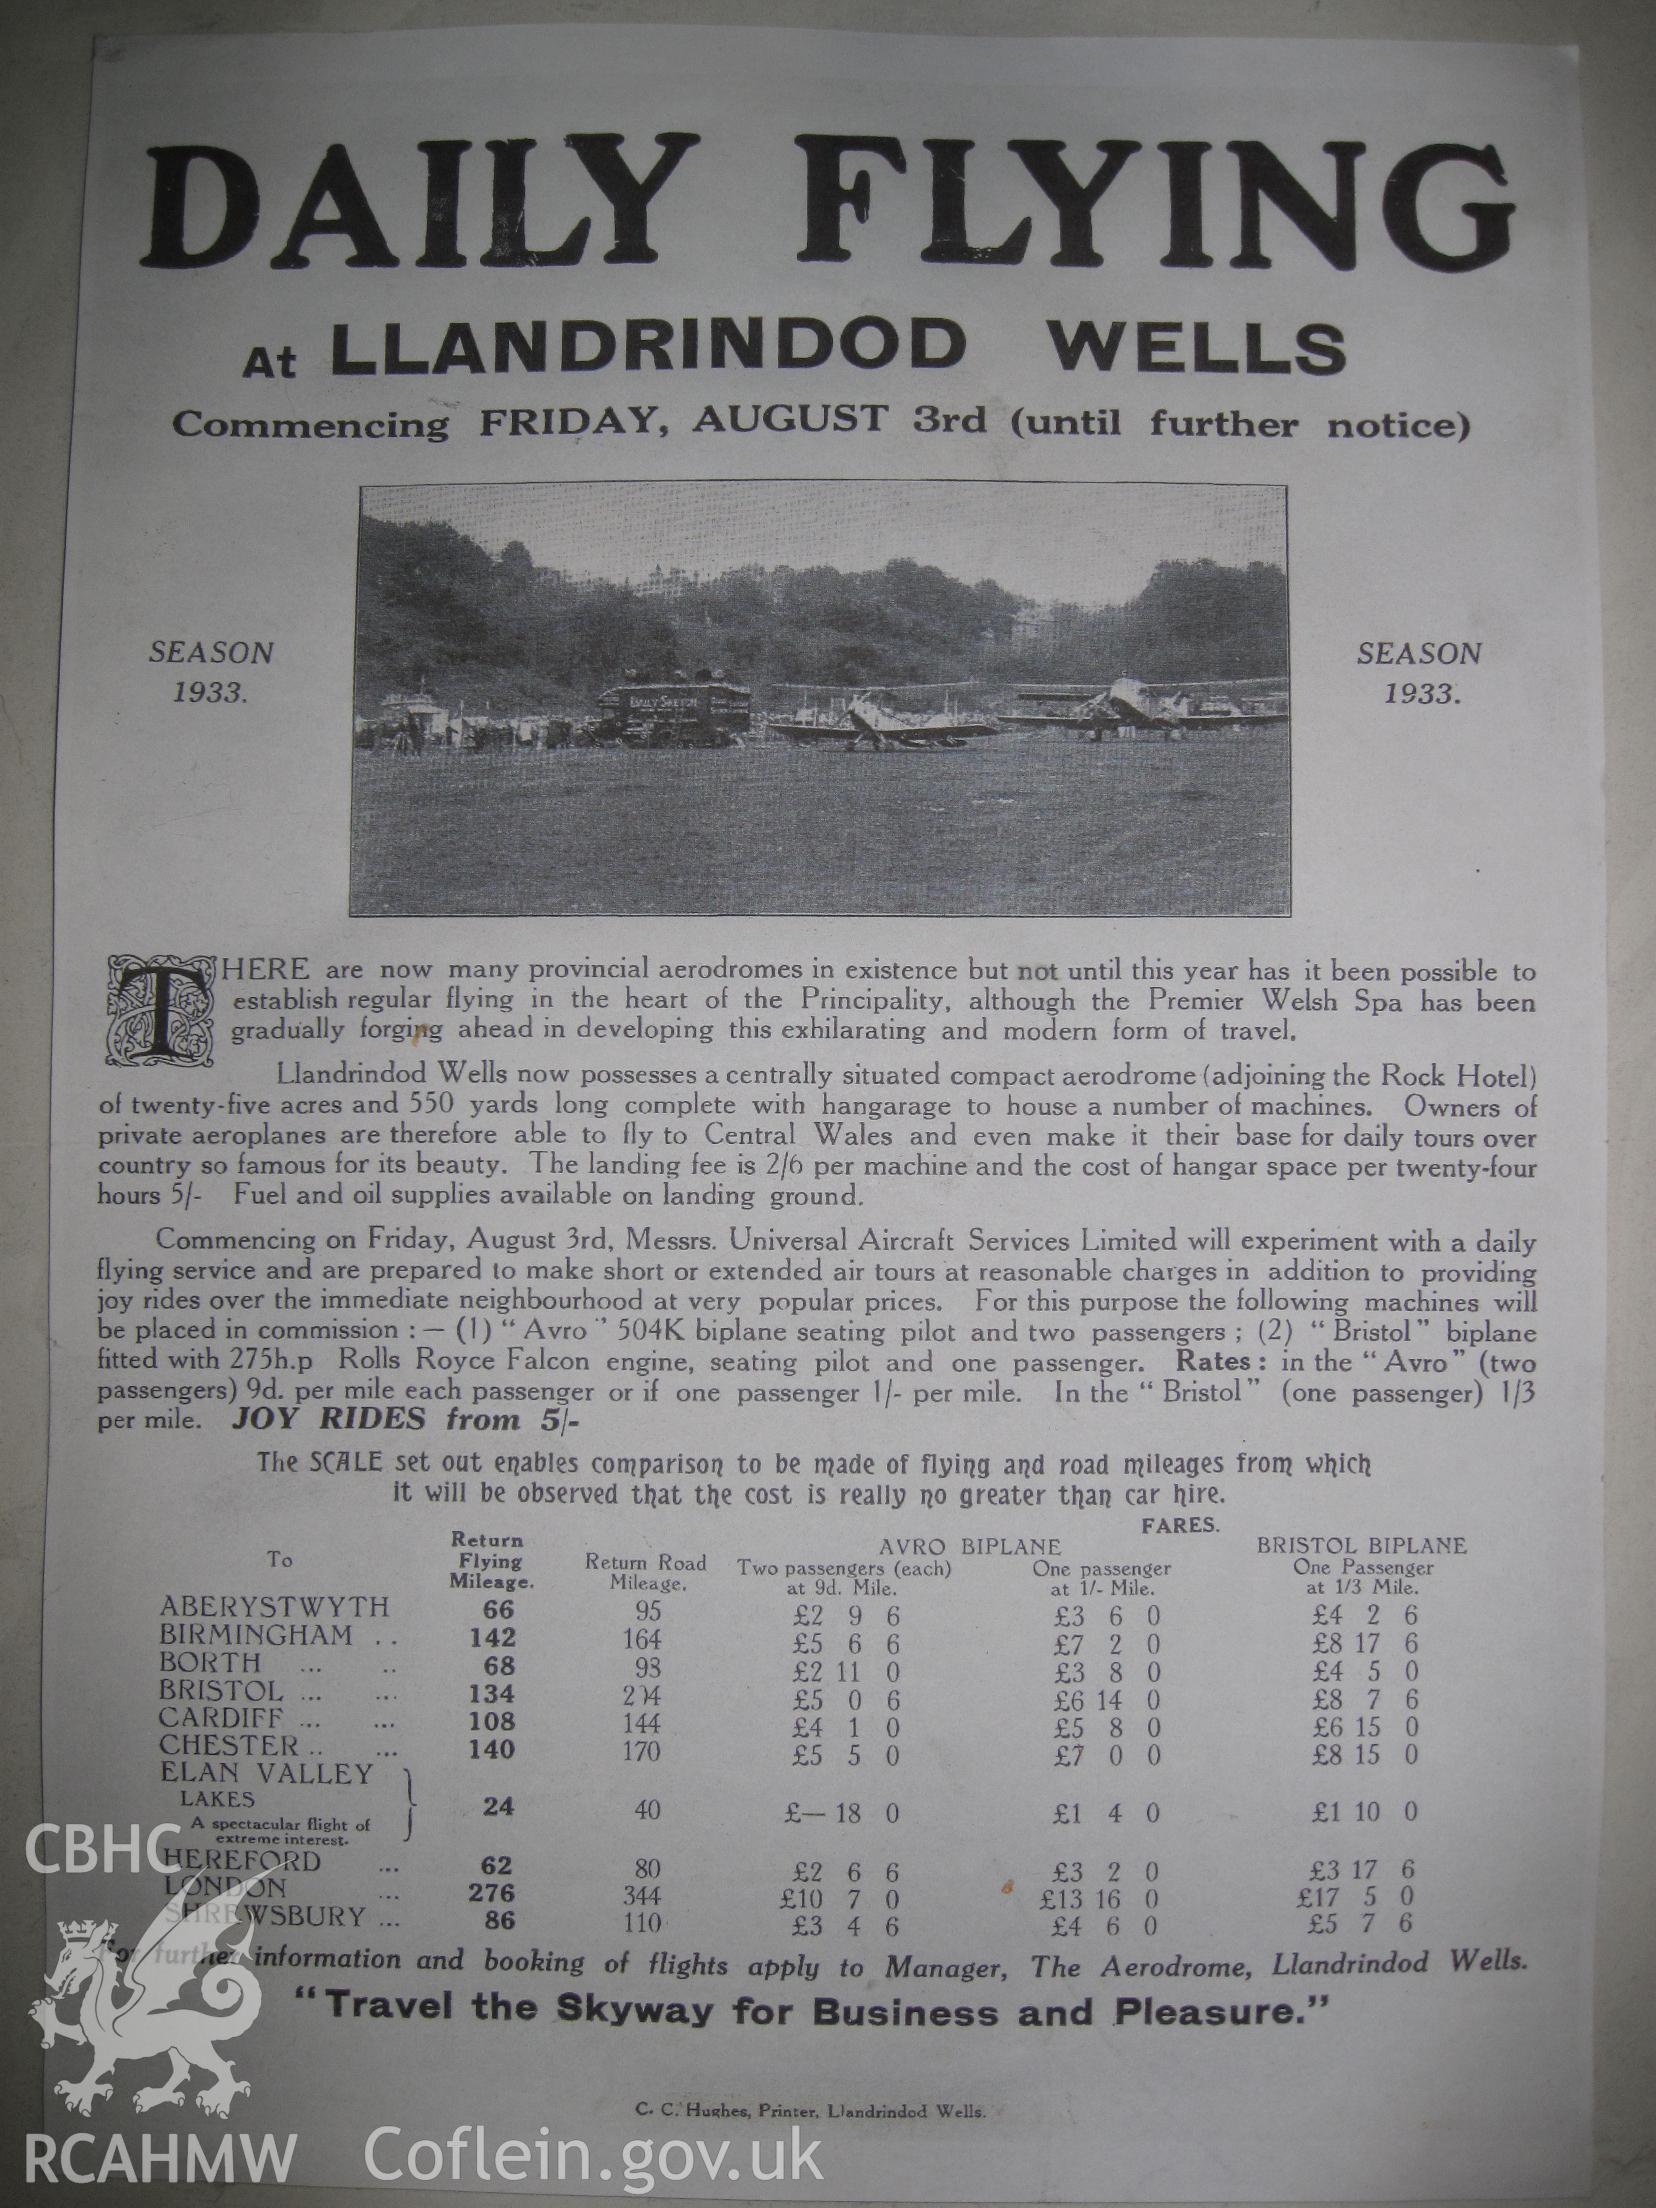 Poster of the Aerodrome at Llandrindod Wells; currently on display in the Cycle Museum, Llandrindod Wells.